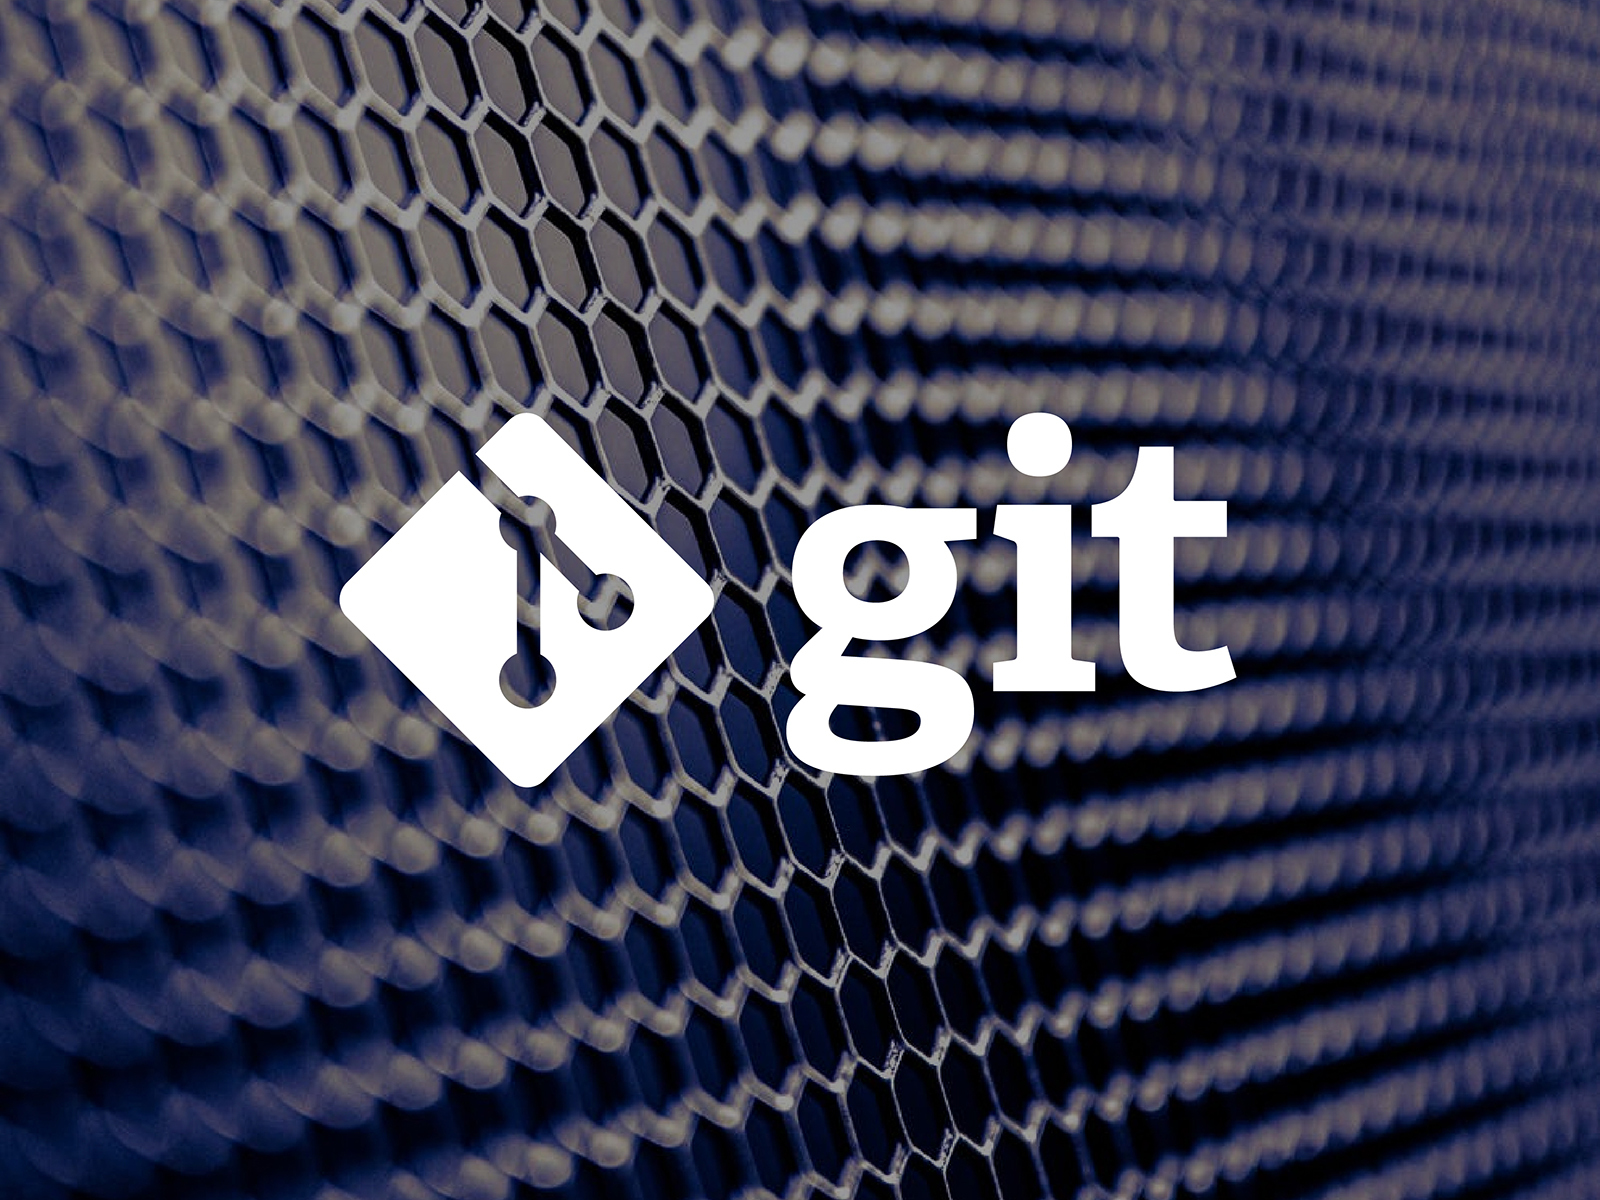 critical-git-vulnerability-allows-rce-when-cloning-repositories-with-submodules